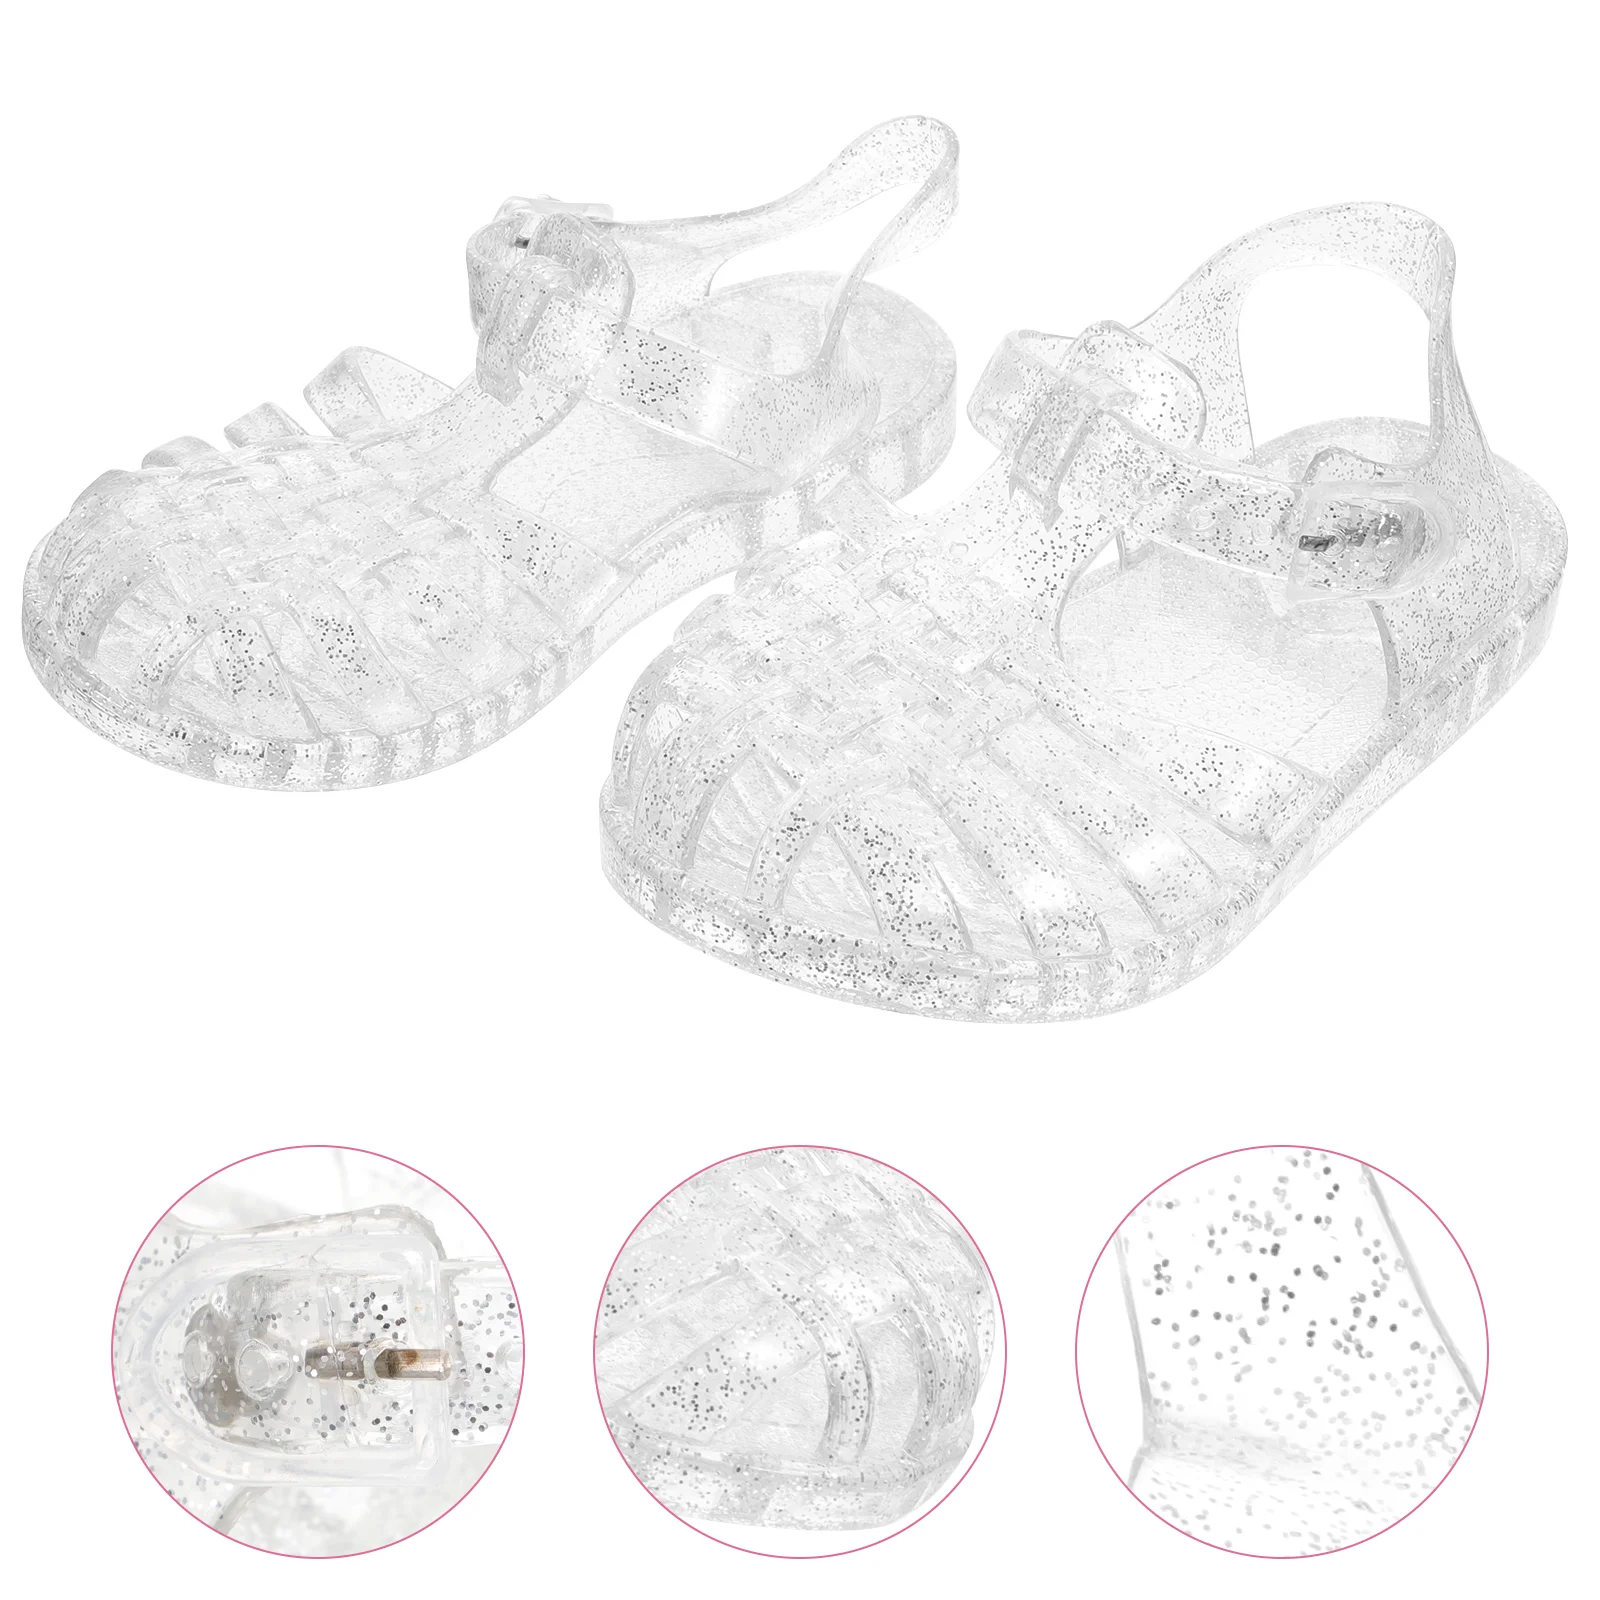 

Soft Sole Toe Shoes Water for Kids Casual Sandals Summer Children Flash Supple-soled Girl Pvc Beach Girls Fashion